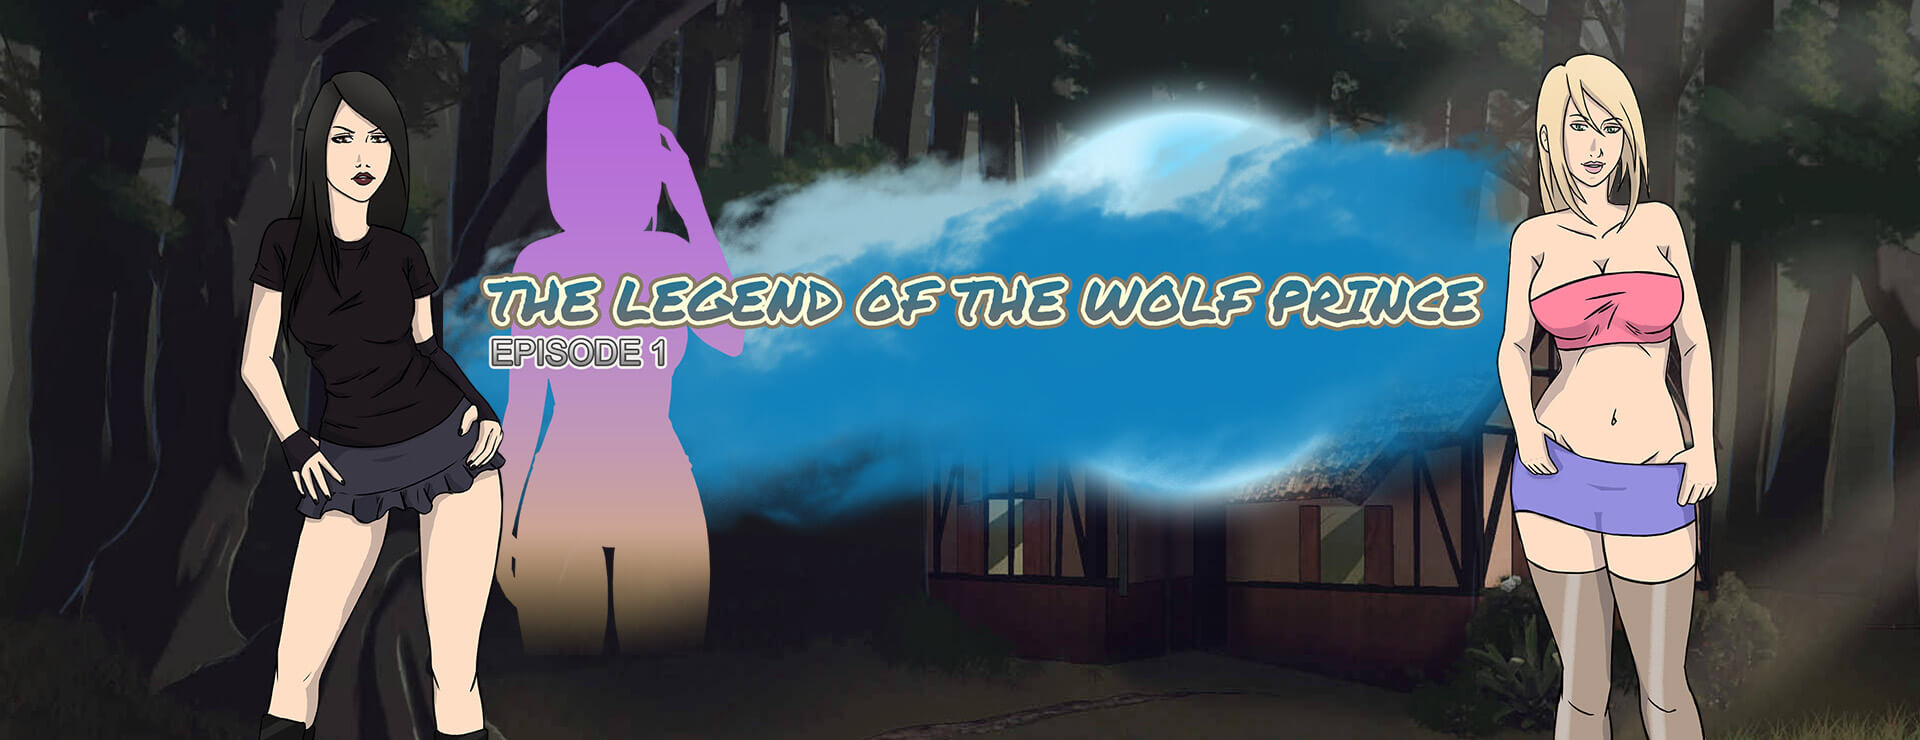 The Legend of the Wolf Prince - Episode 1 - Visual Novel Game